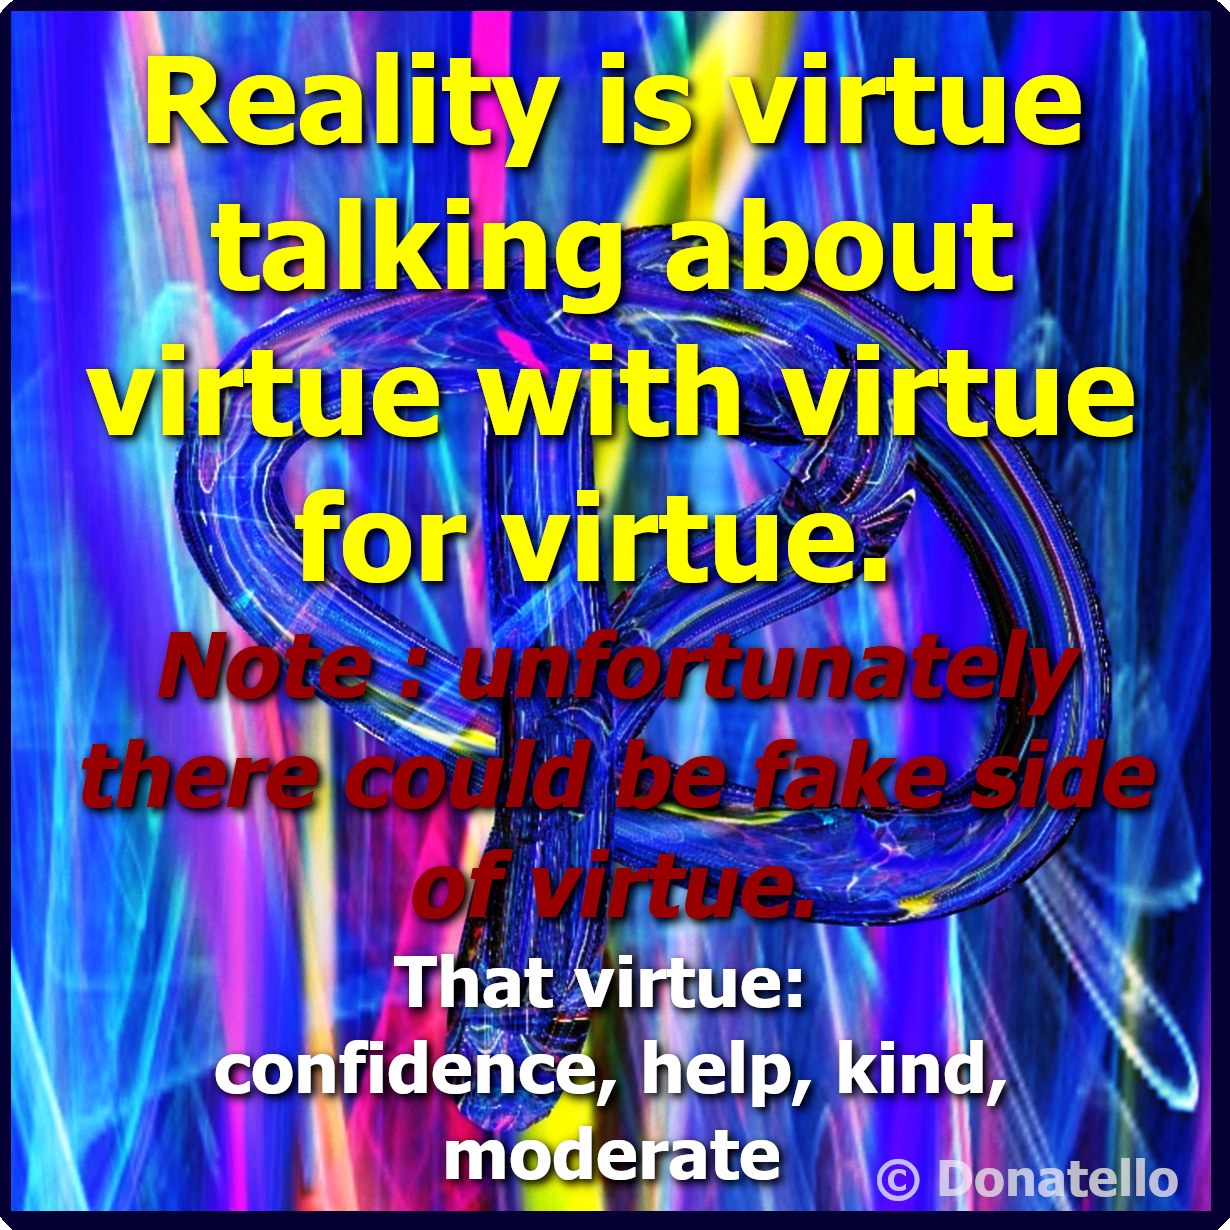 Asked me regarding metaphysical definition of reality.

Reality is virtue talking about virtue with virtue for virtue.

Note : unfortunatelly there could be fake side of virtue.
That virtue: confidence, help, kind, moderate

source: preliminary adaptive predicates in empty start natural language parsing software simulation assumption

example of:
reality is confidence talking about help with kind for moderate
reality is help talking about confidence with moderate for kind
and so on …

more about confidence, help, kind, moderate ...
I stratified man deadly sins as wrath, avarice, envy and woman temptation sloth, lust, vanity, gluttony is also man and woman temptation.
more around
www.fengshuistaff.com See less